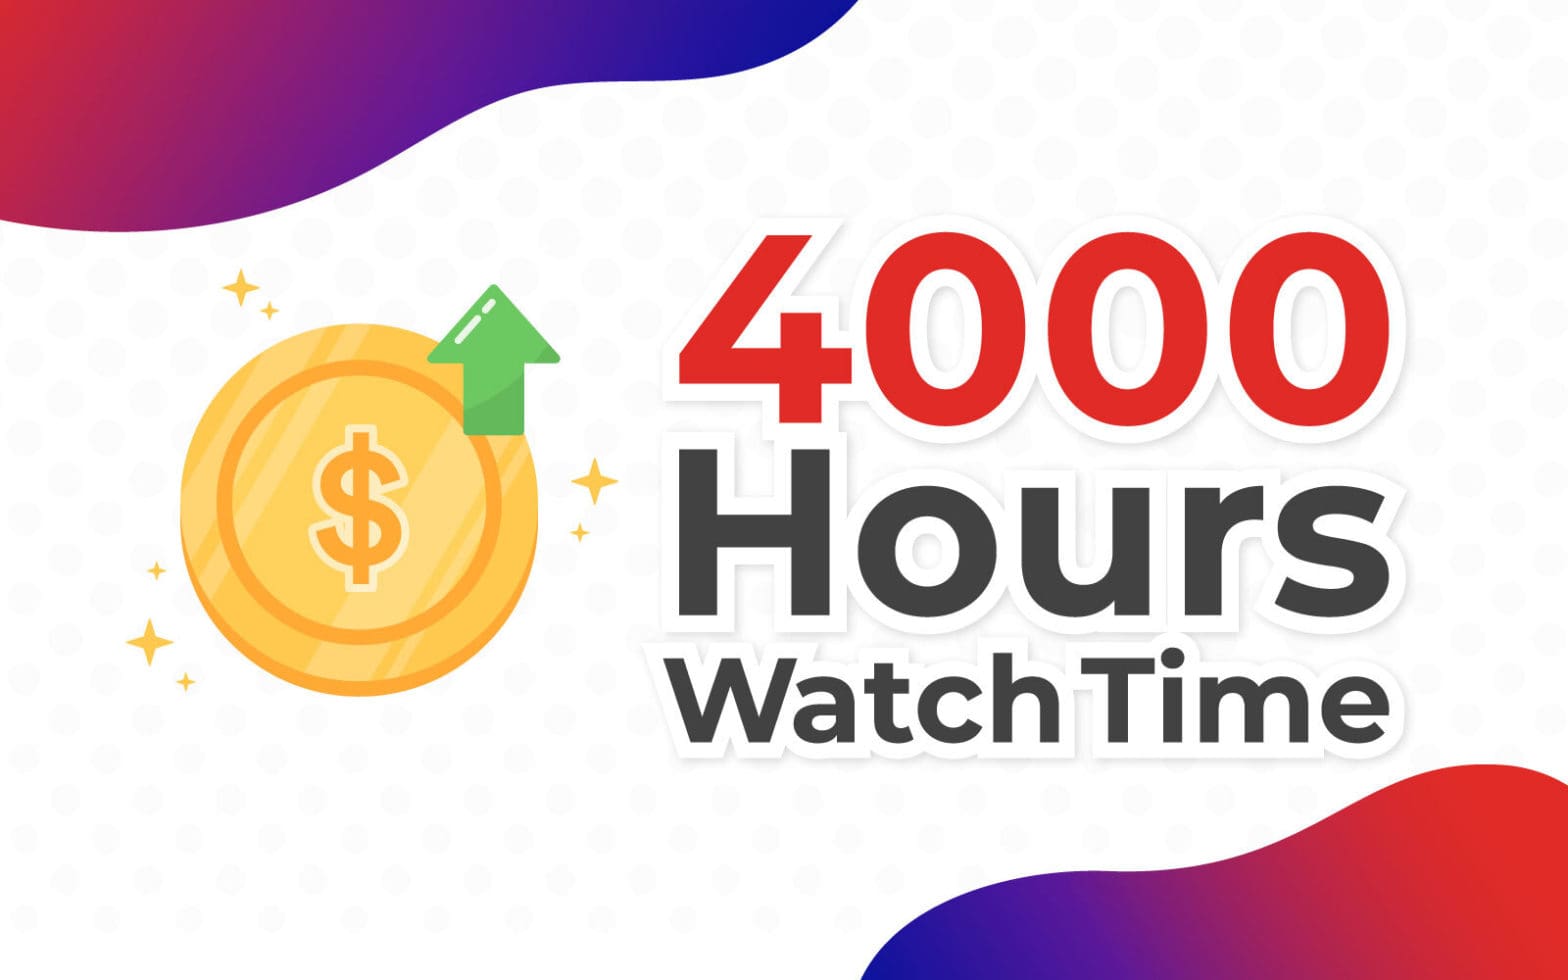 How many is 4000 hours in YouTube?